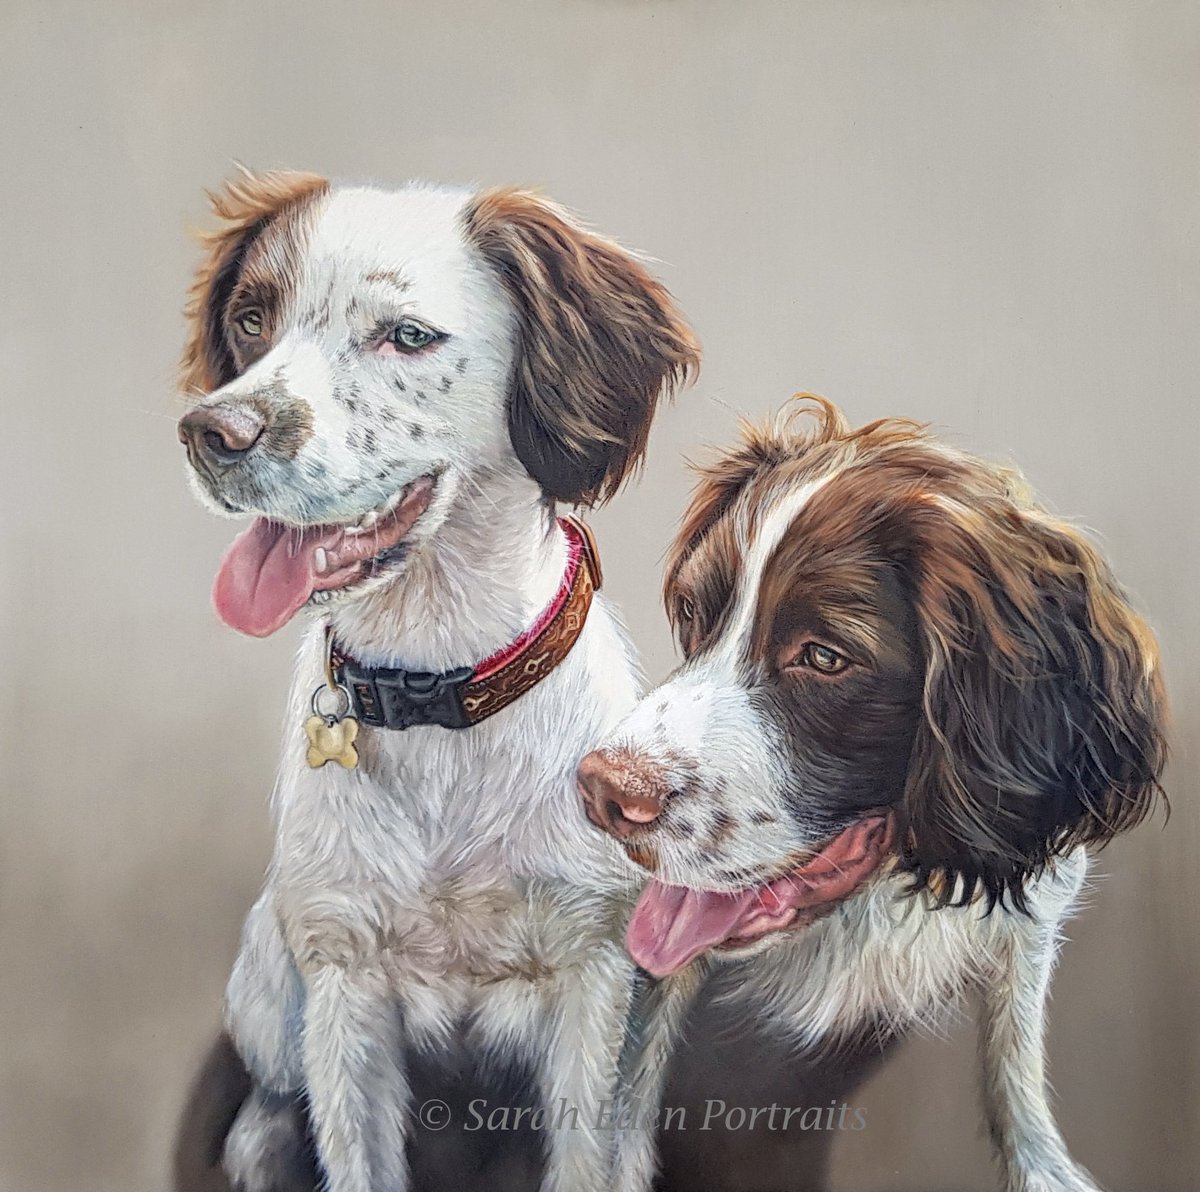 Just finished this lovely pair of Springers! Oil on board, 16 x 16'. Please get in touch if you're considering a commission of your own. :-) 

#springer #springerspaniel #petportrait #oilportrait #dogpainting #art #paintmydog